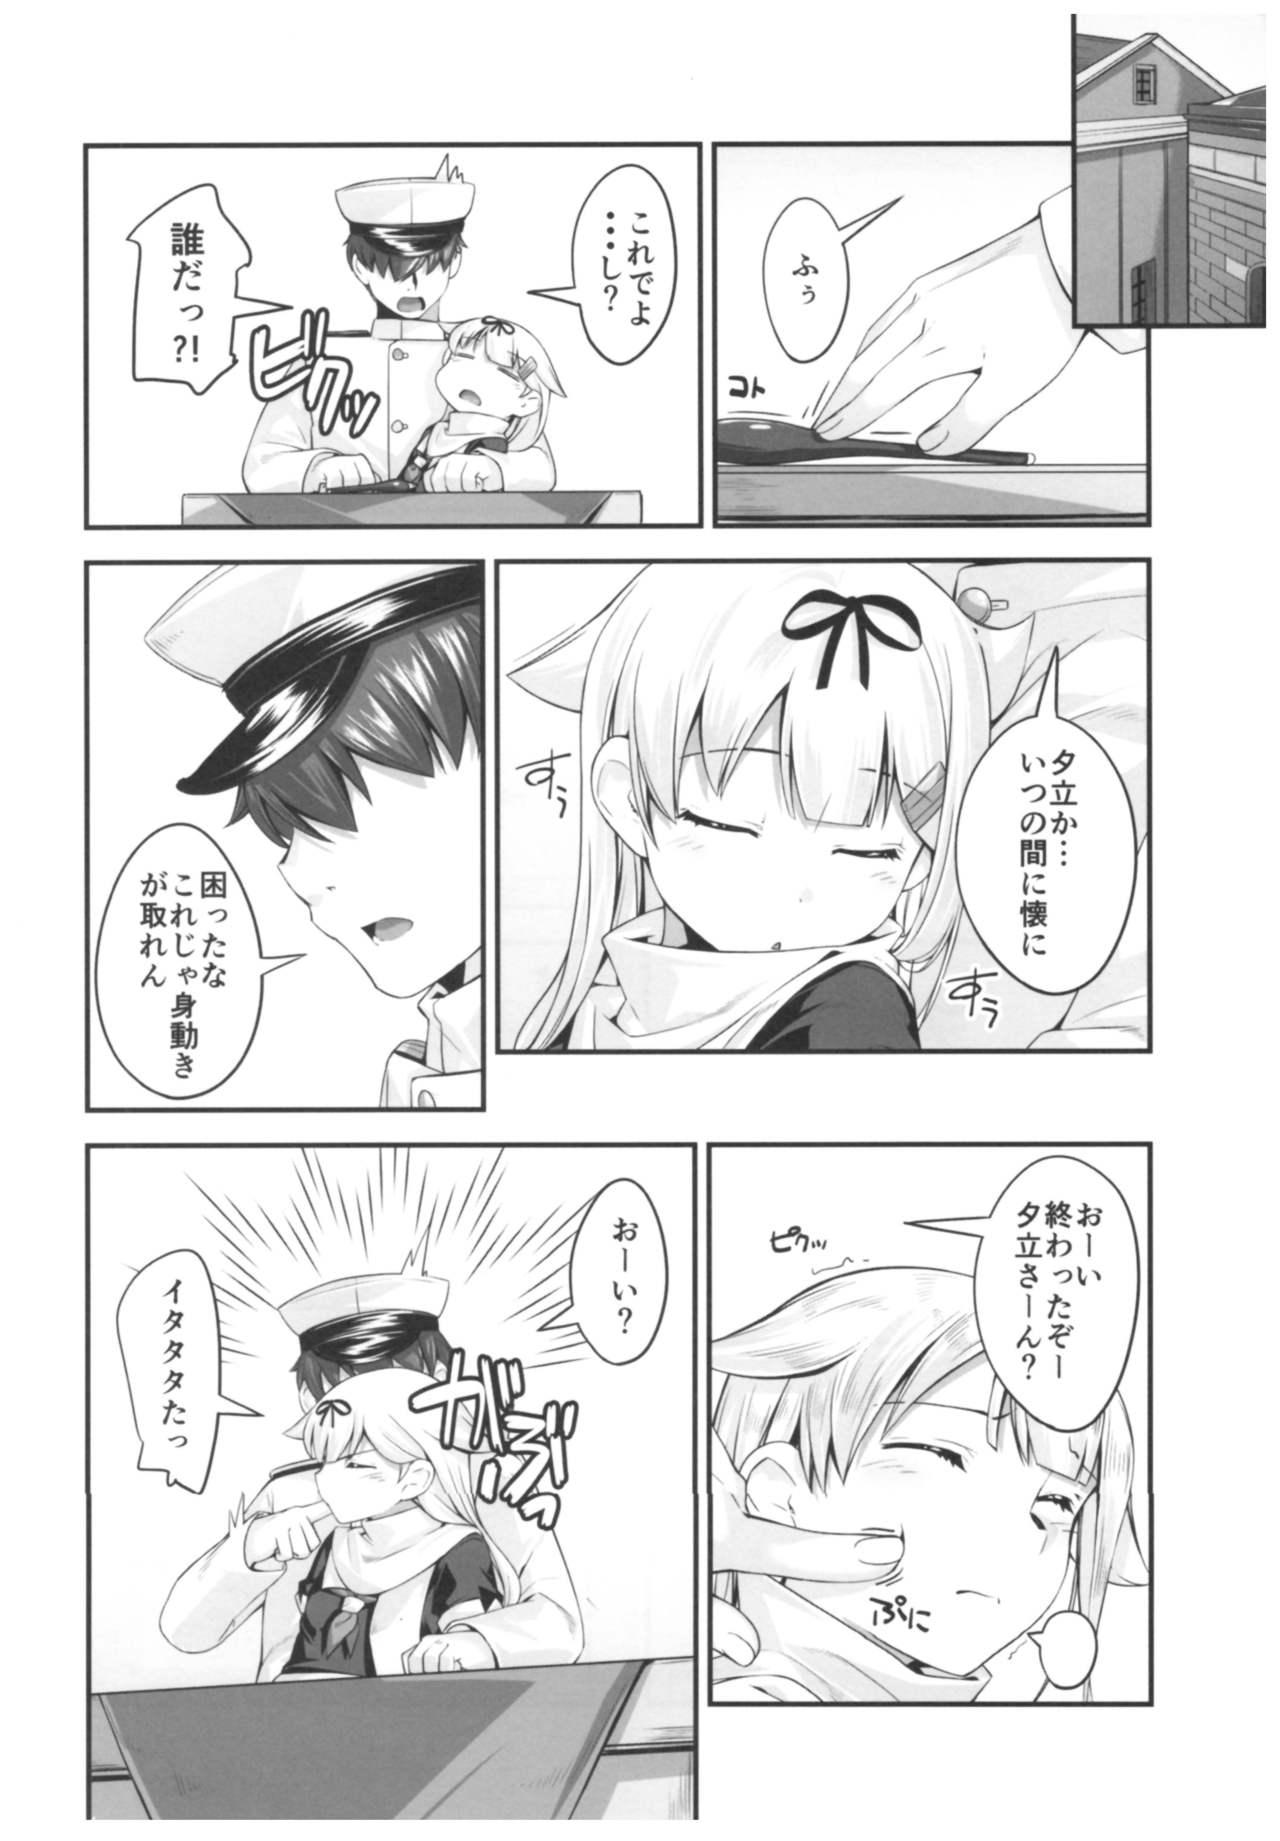 Spreading Yuudachi to Yuudachi - Kantai collection Exhibition - Page 5